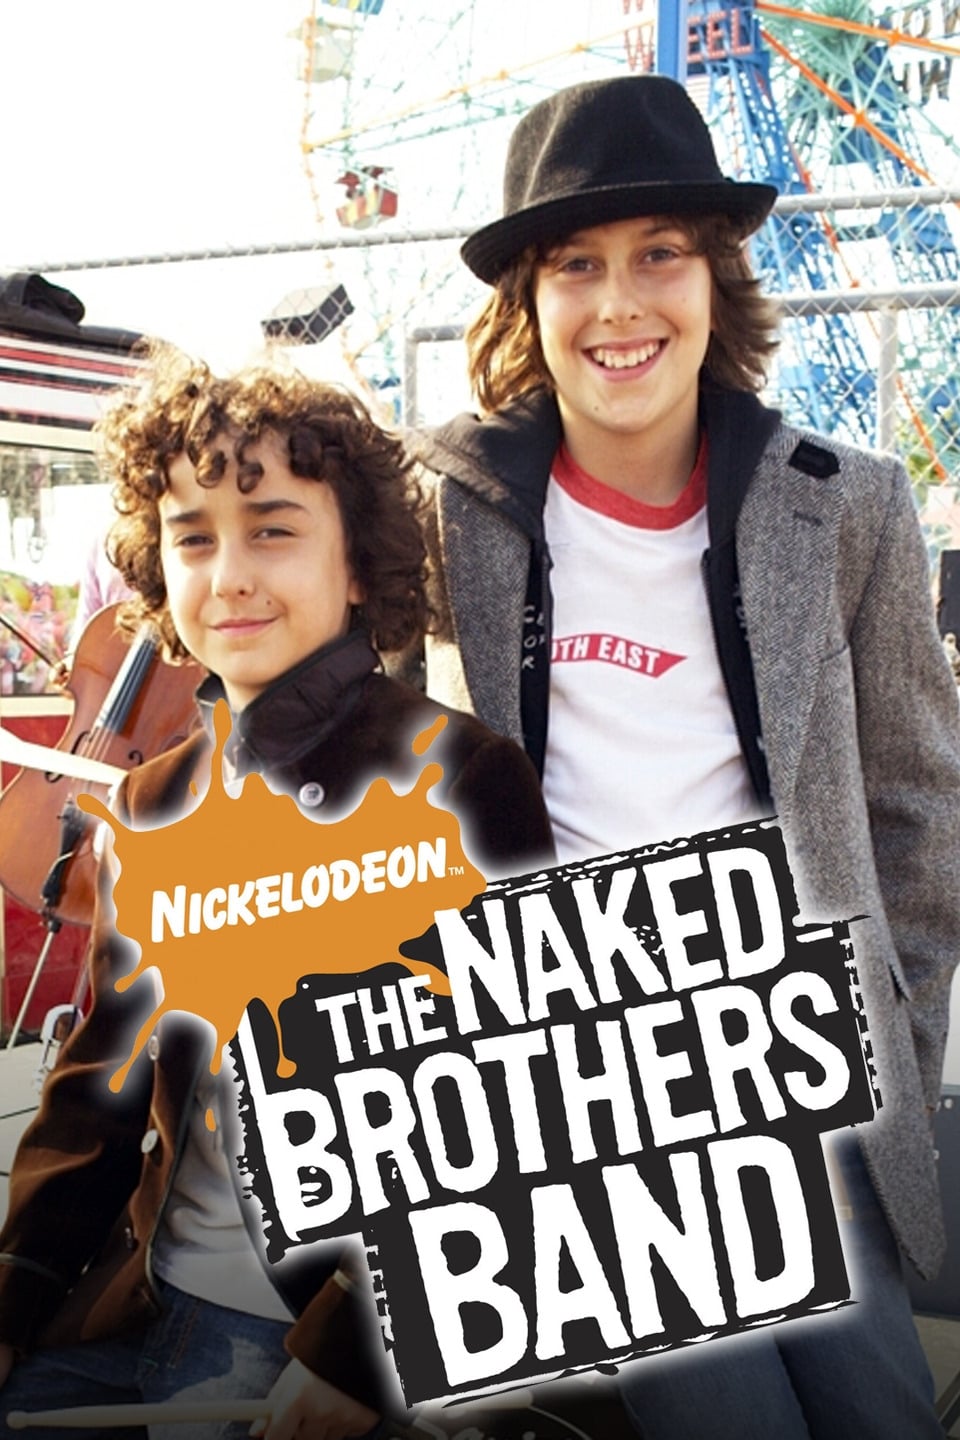 A Definitive Ranking Of The Top 10 Naked Brothers Band Songs